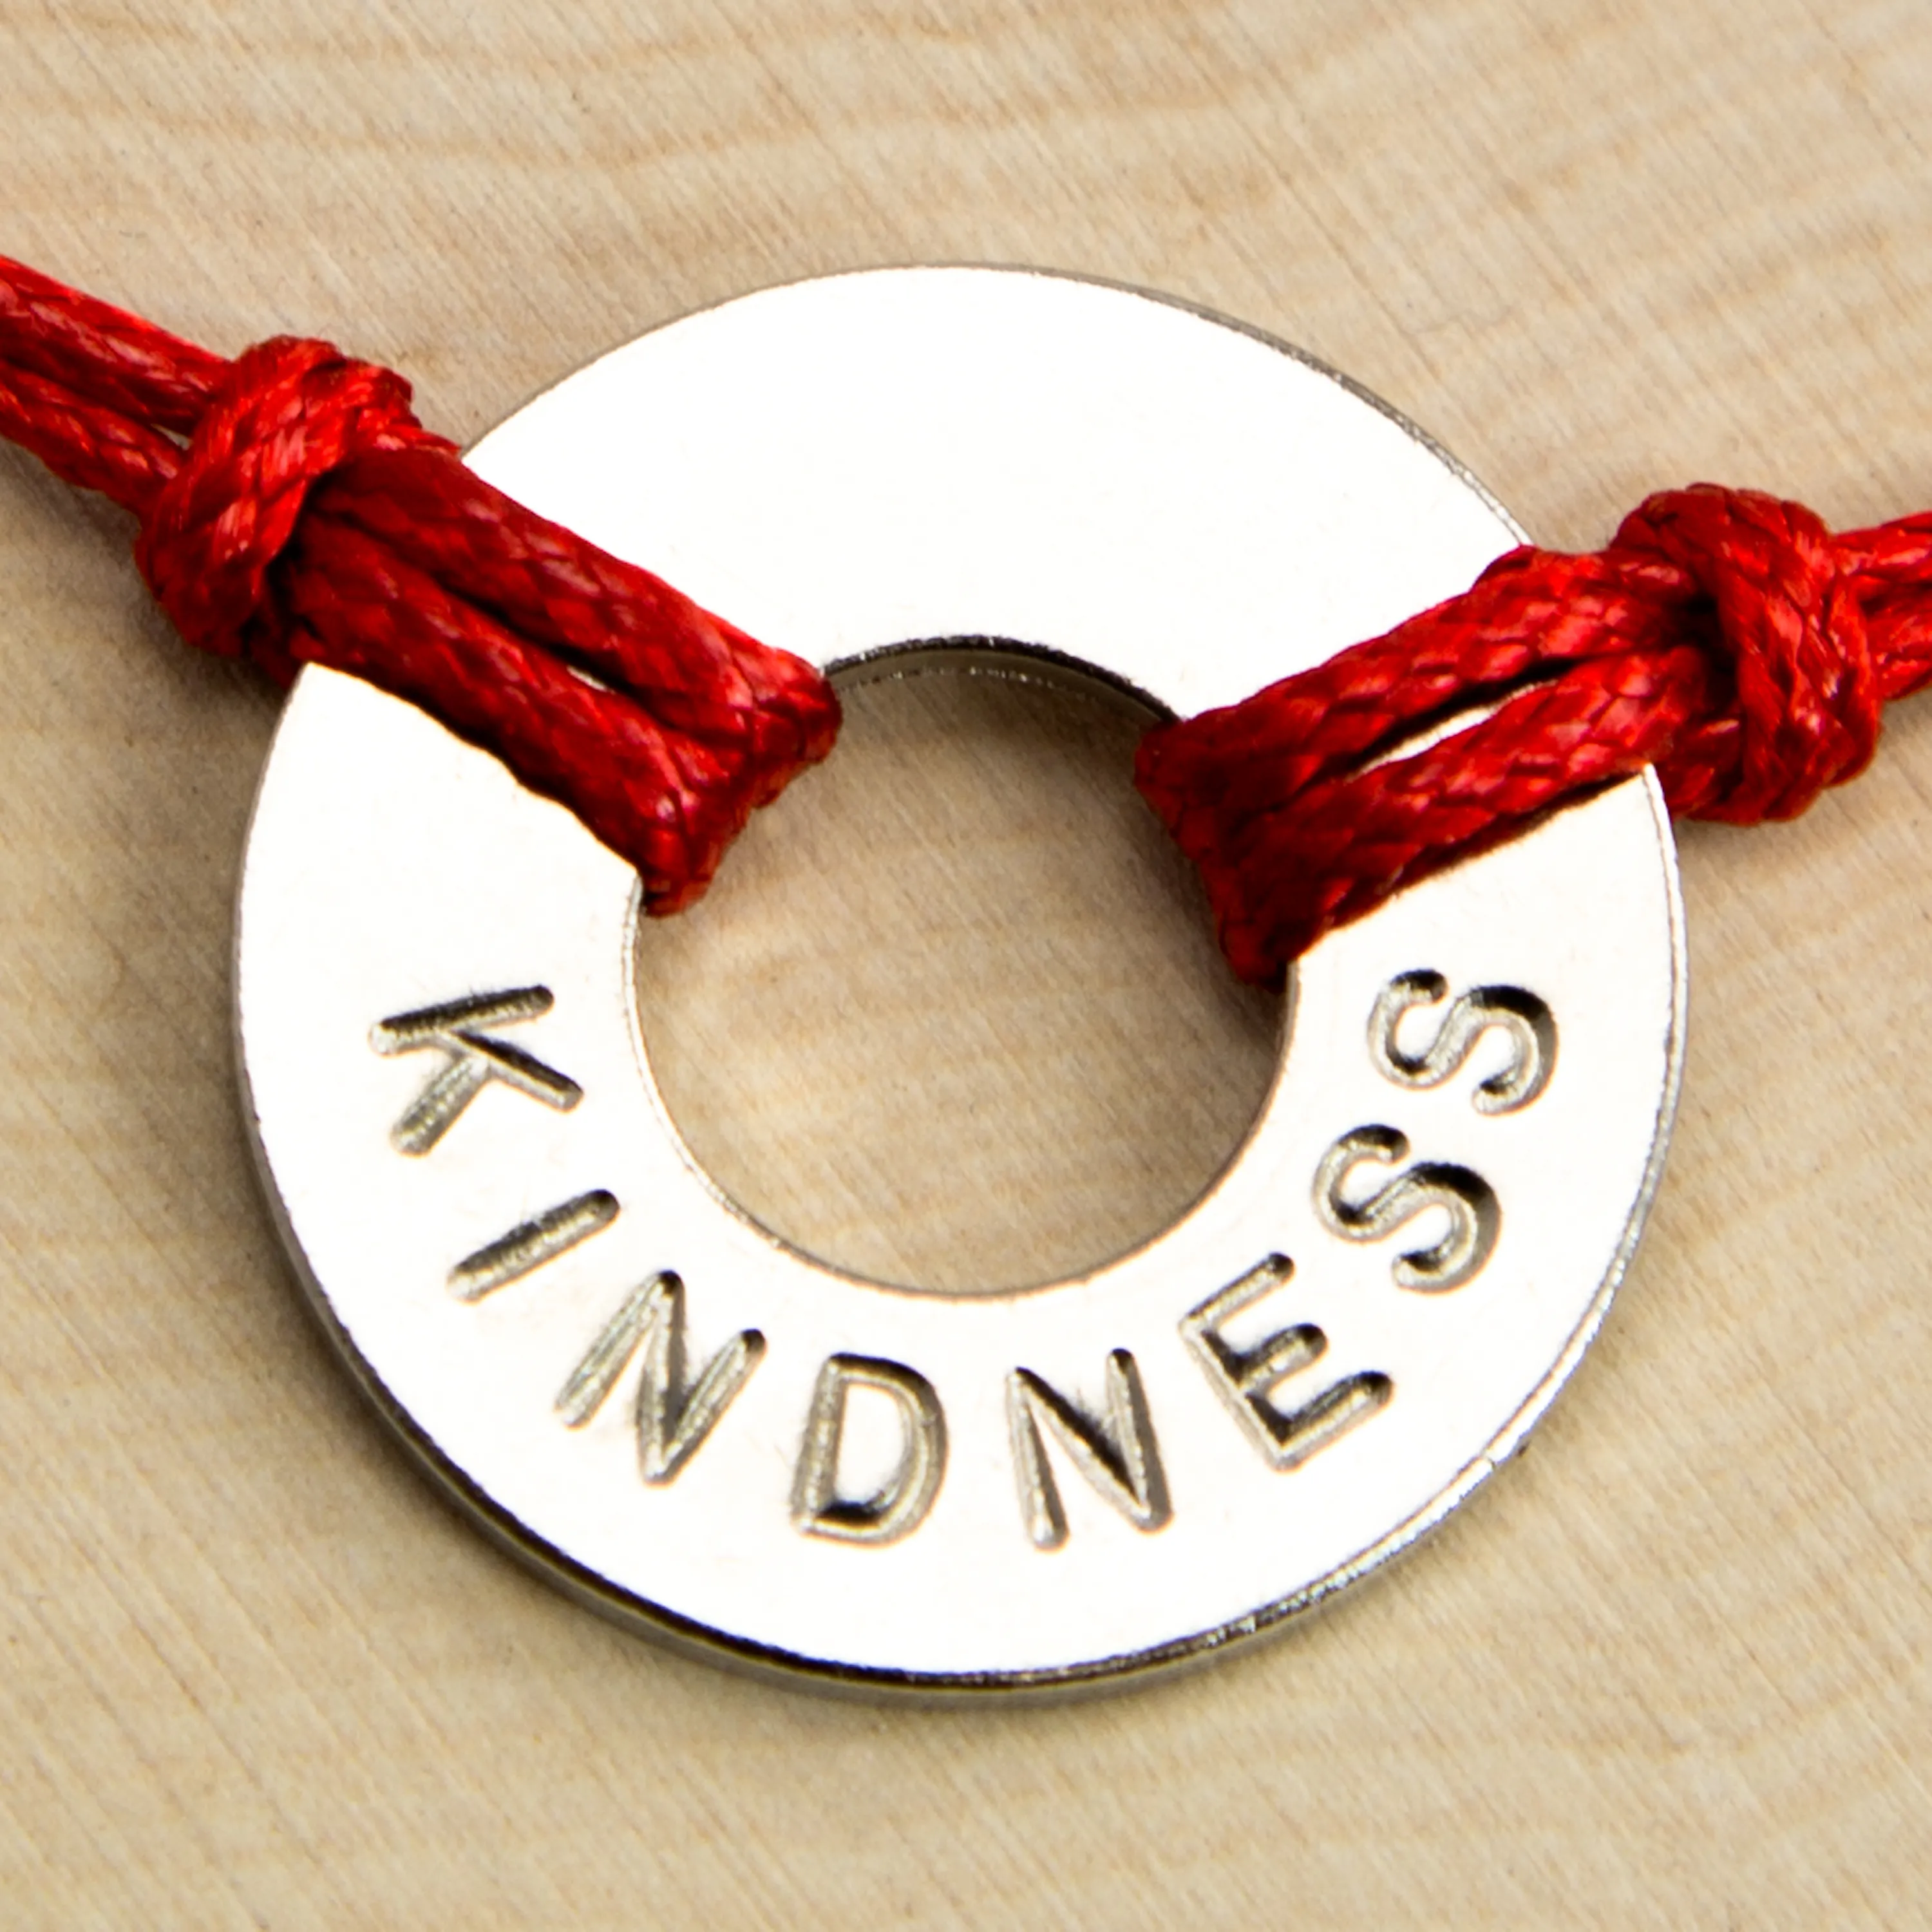 Washer with word "KINDNESS" imprinted with red rope